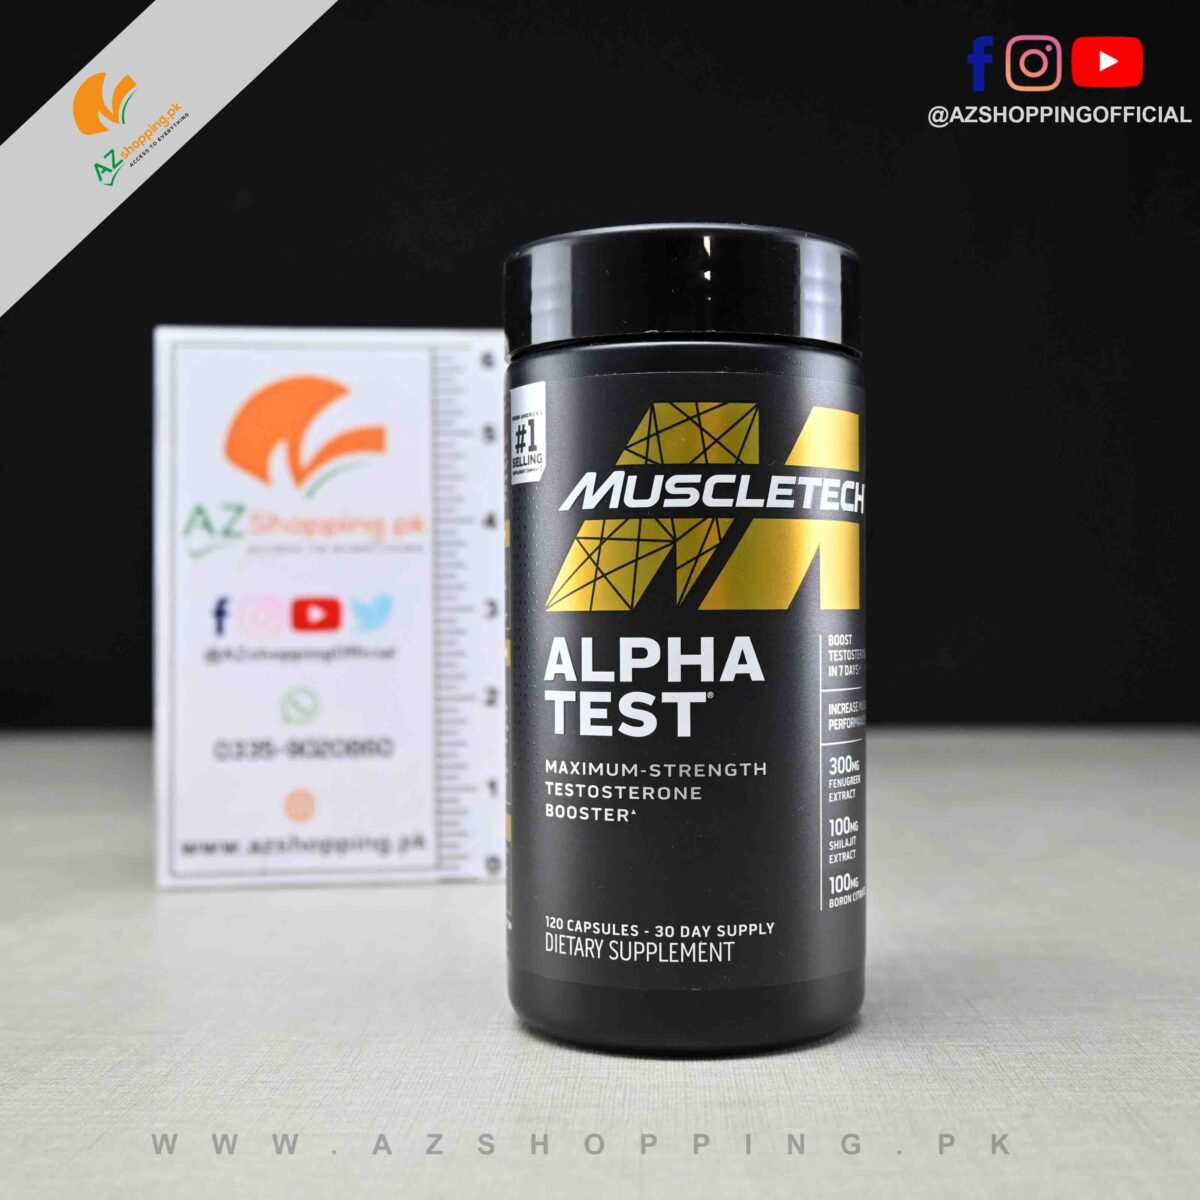 Muscletech Pro Series – Alpha test – Maximum Strength testosterone Booster for Men – 120 Capsules